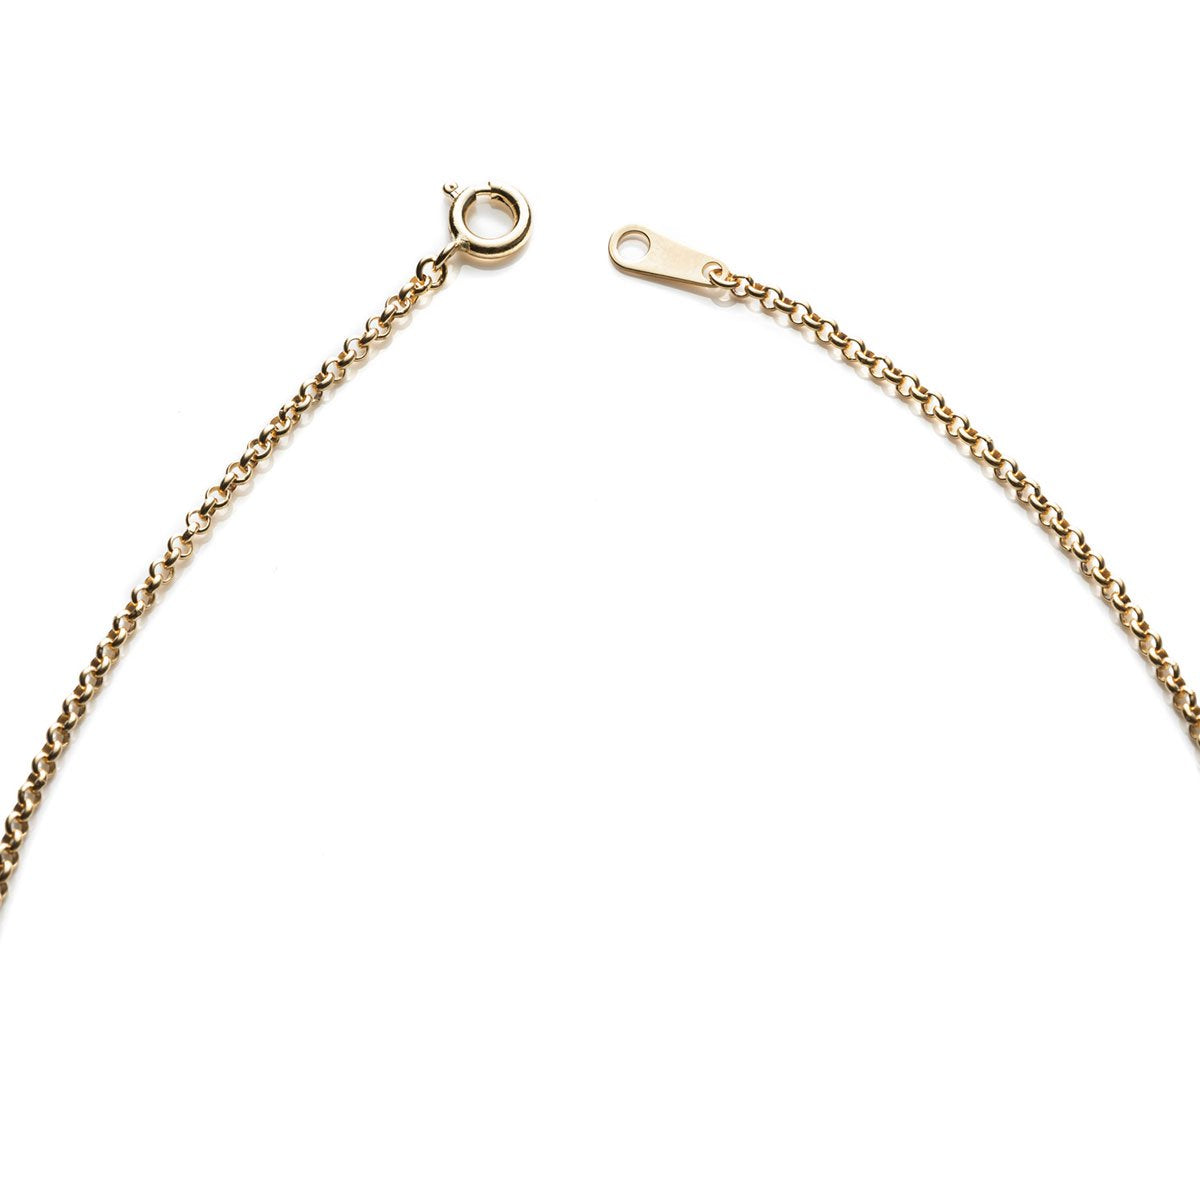 TIGHTBOOTH LOGO NECKLACE - BRASS